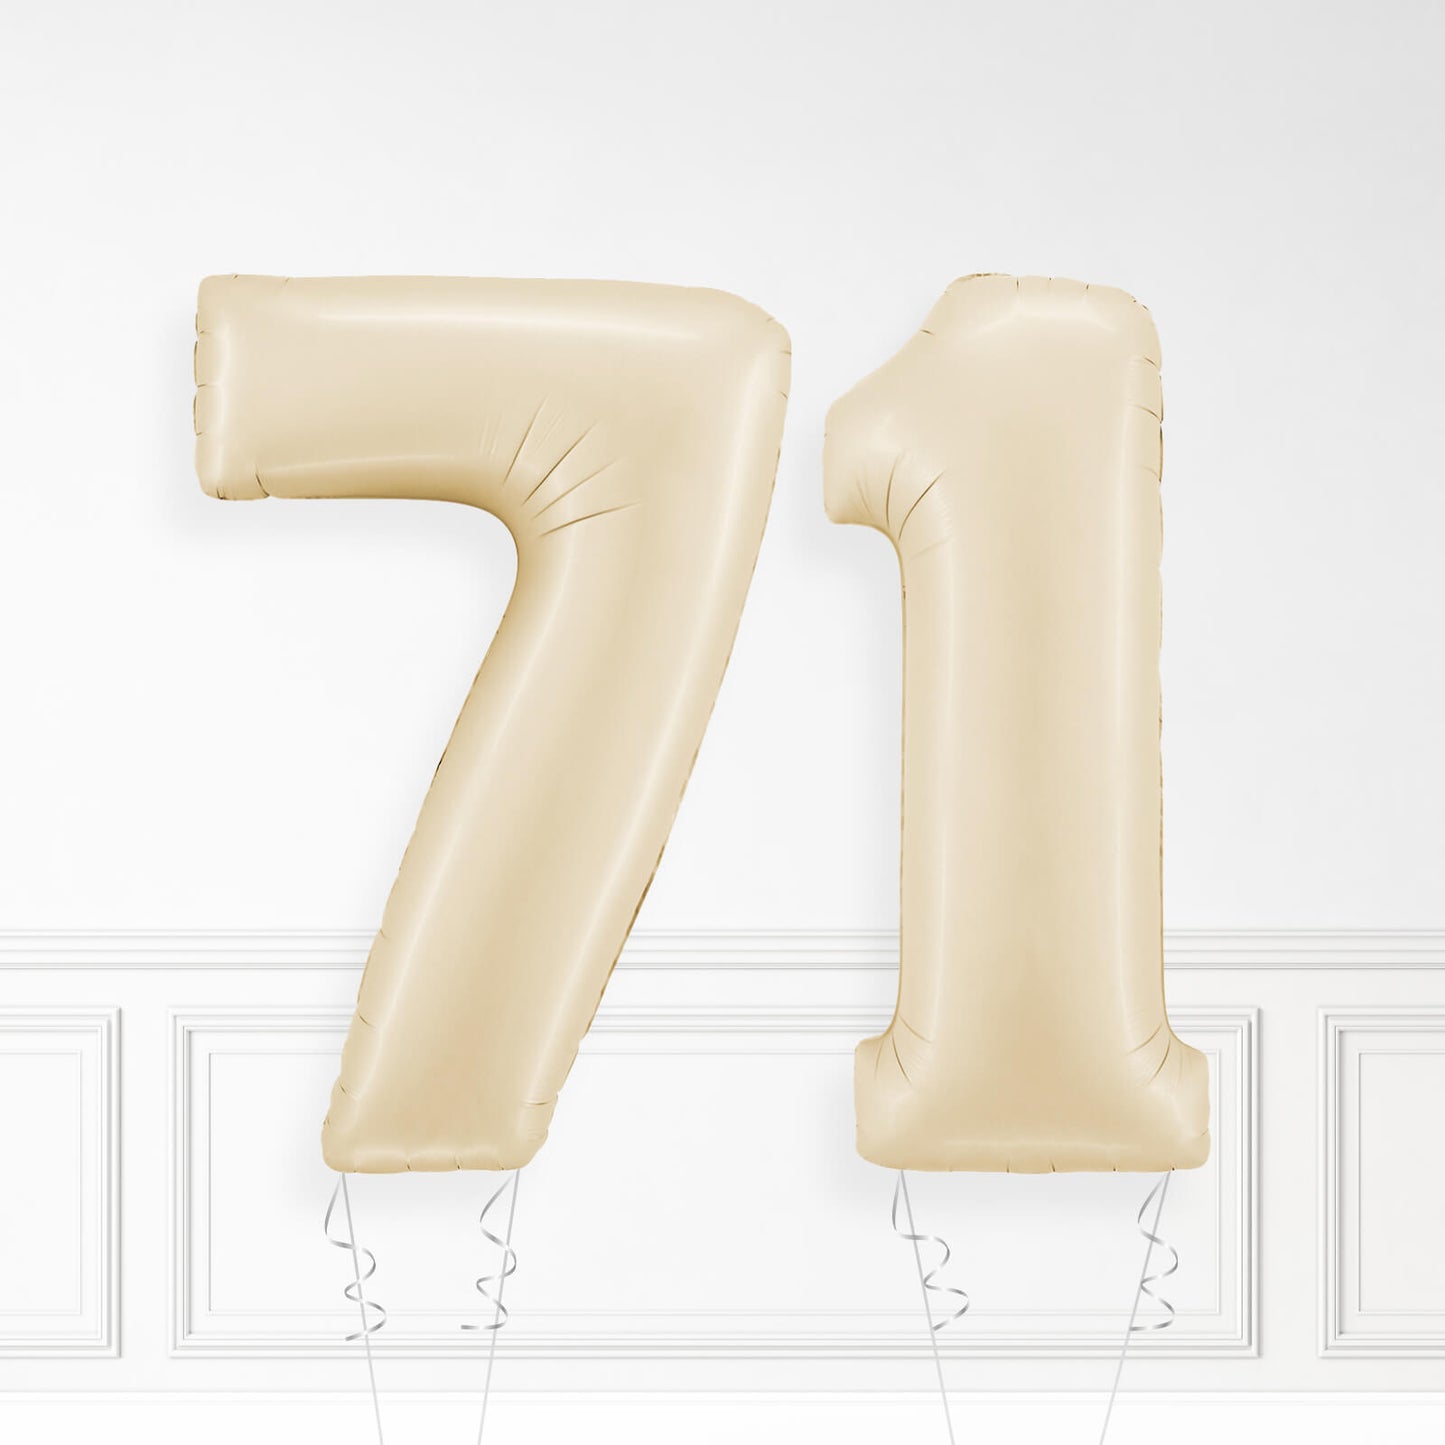 Inflated Cream Foil Number Balloon